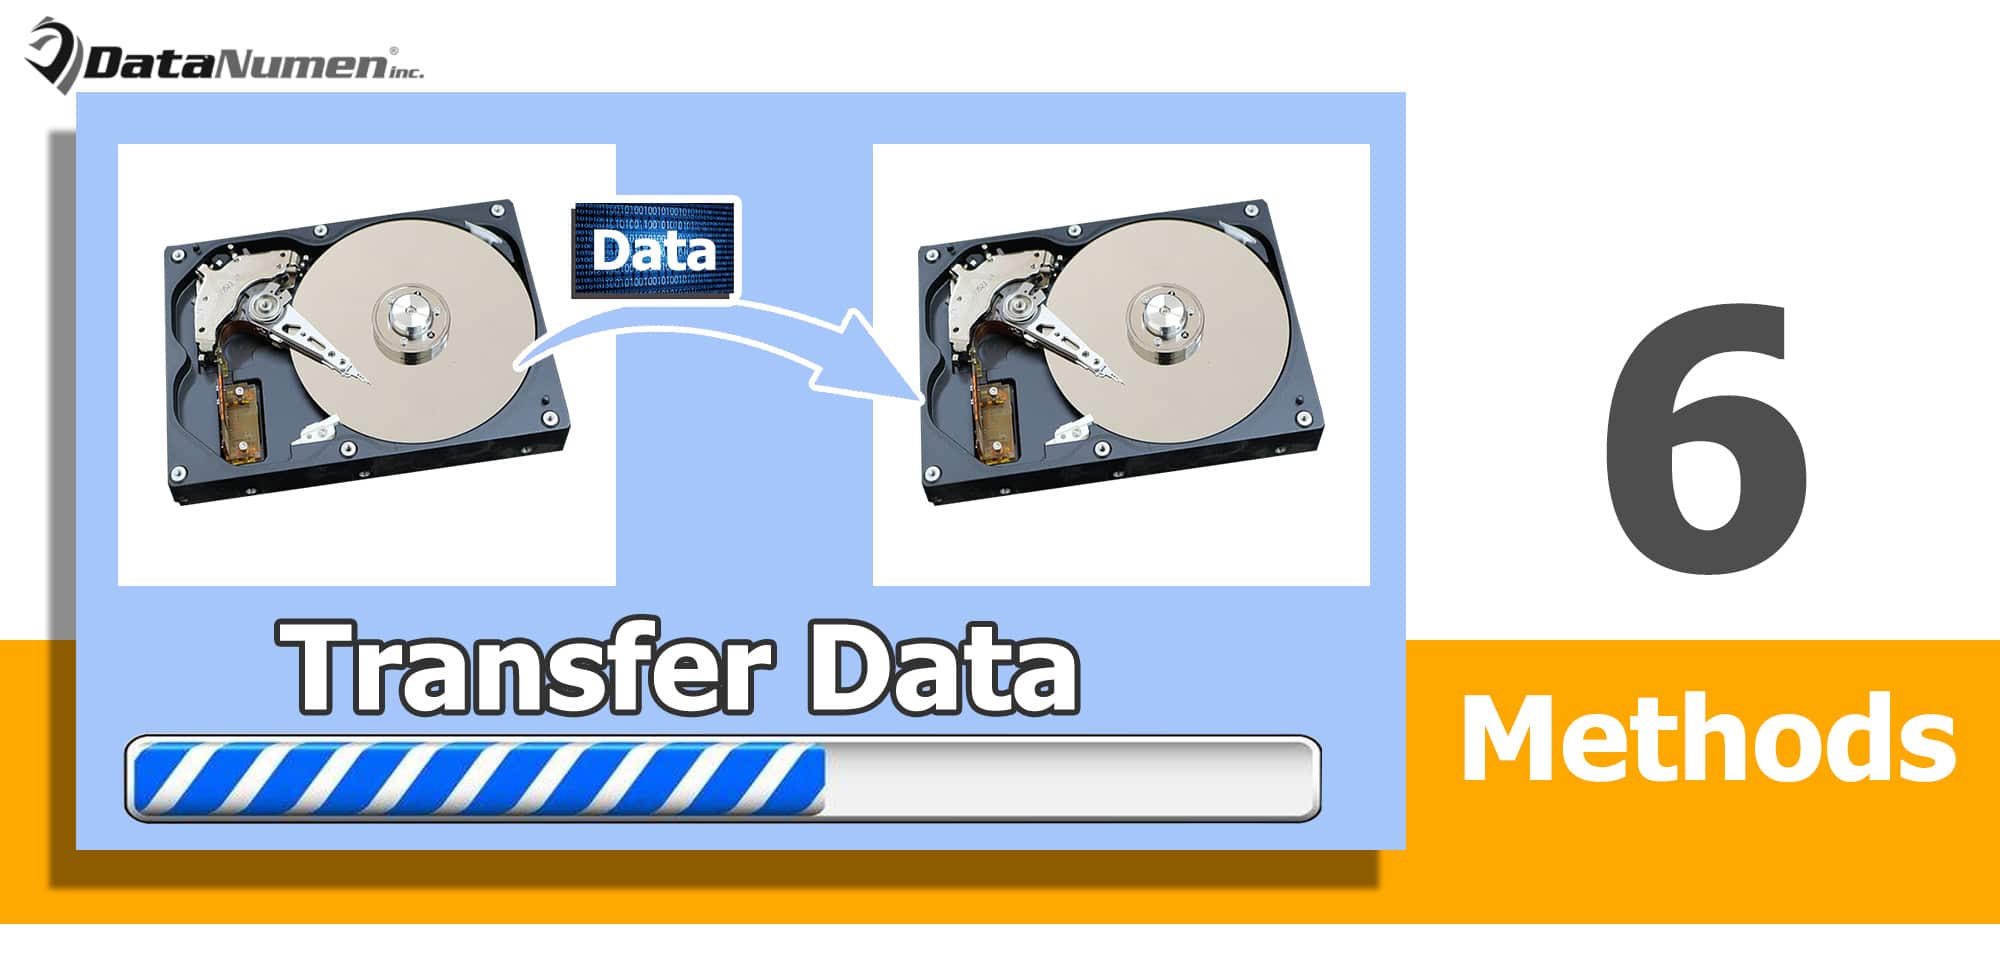 6 Easy Methods to Transfer Data from One Hard Drive to Another